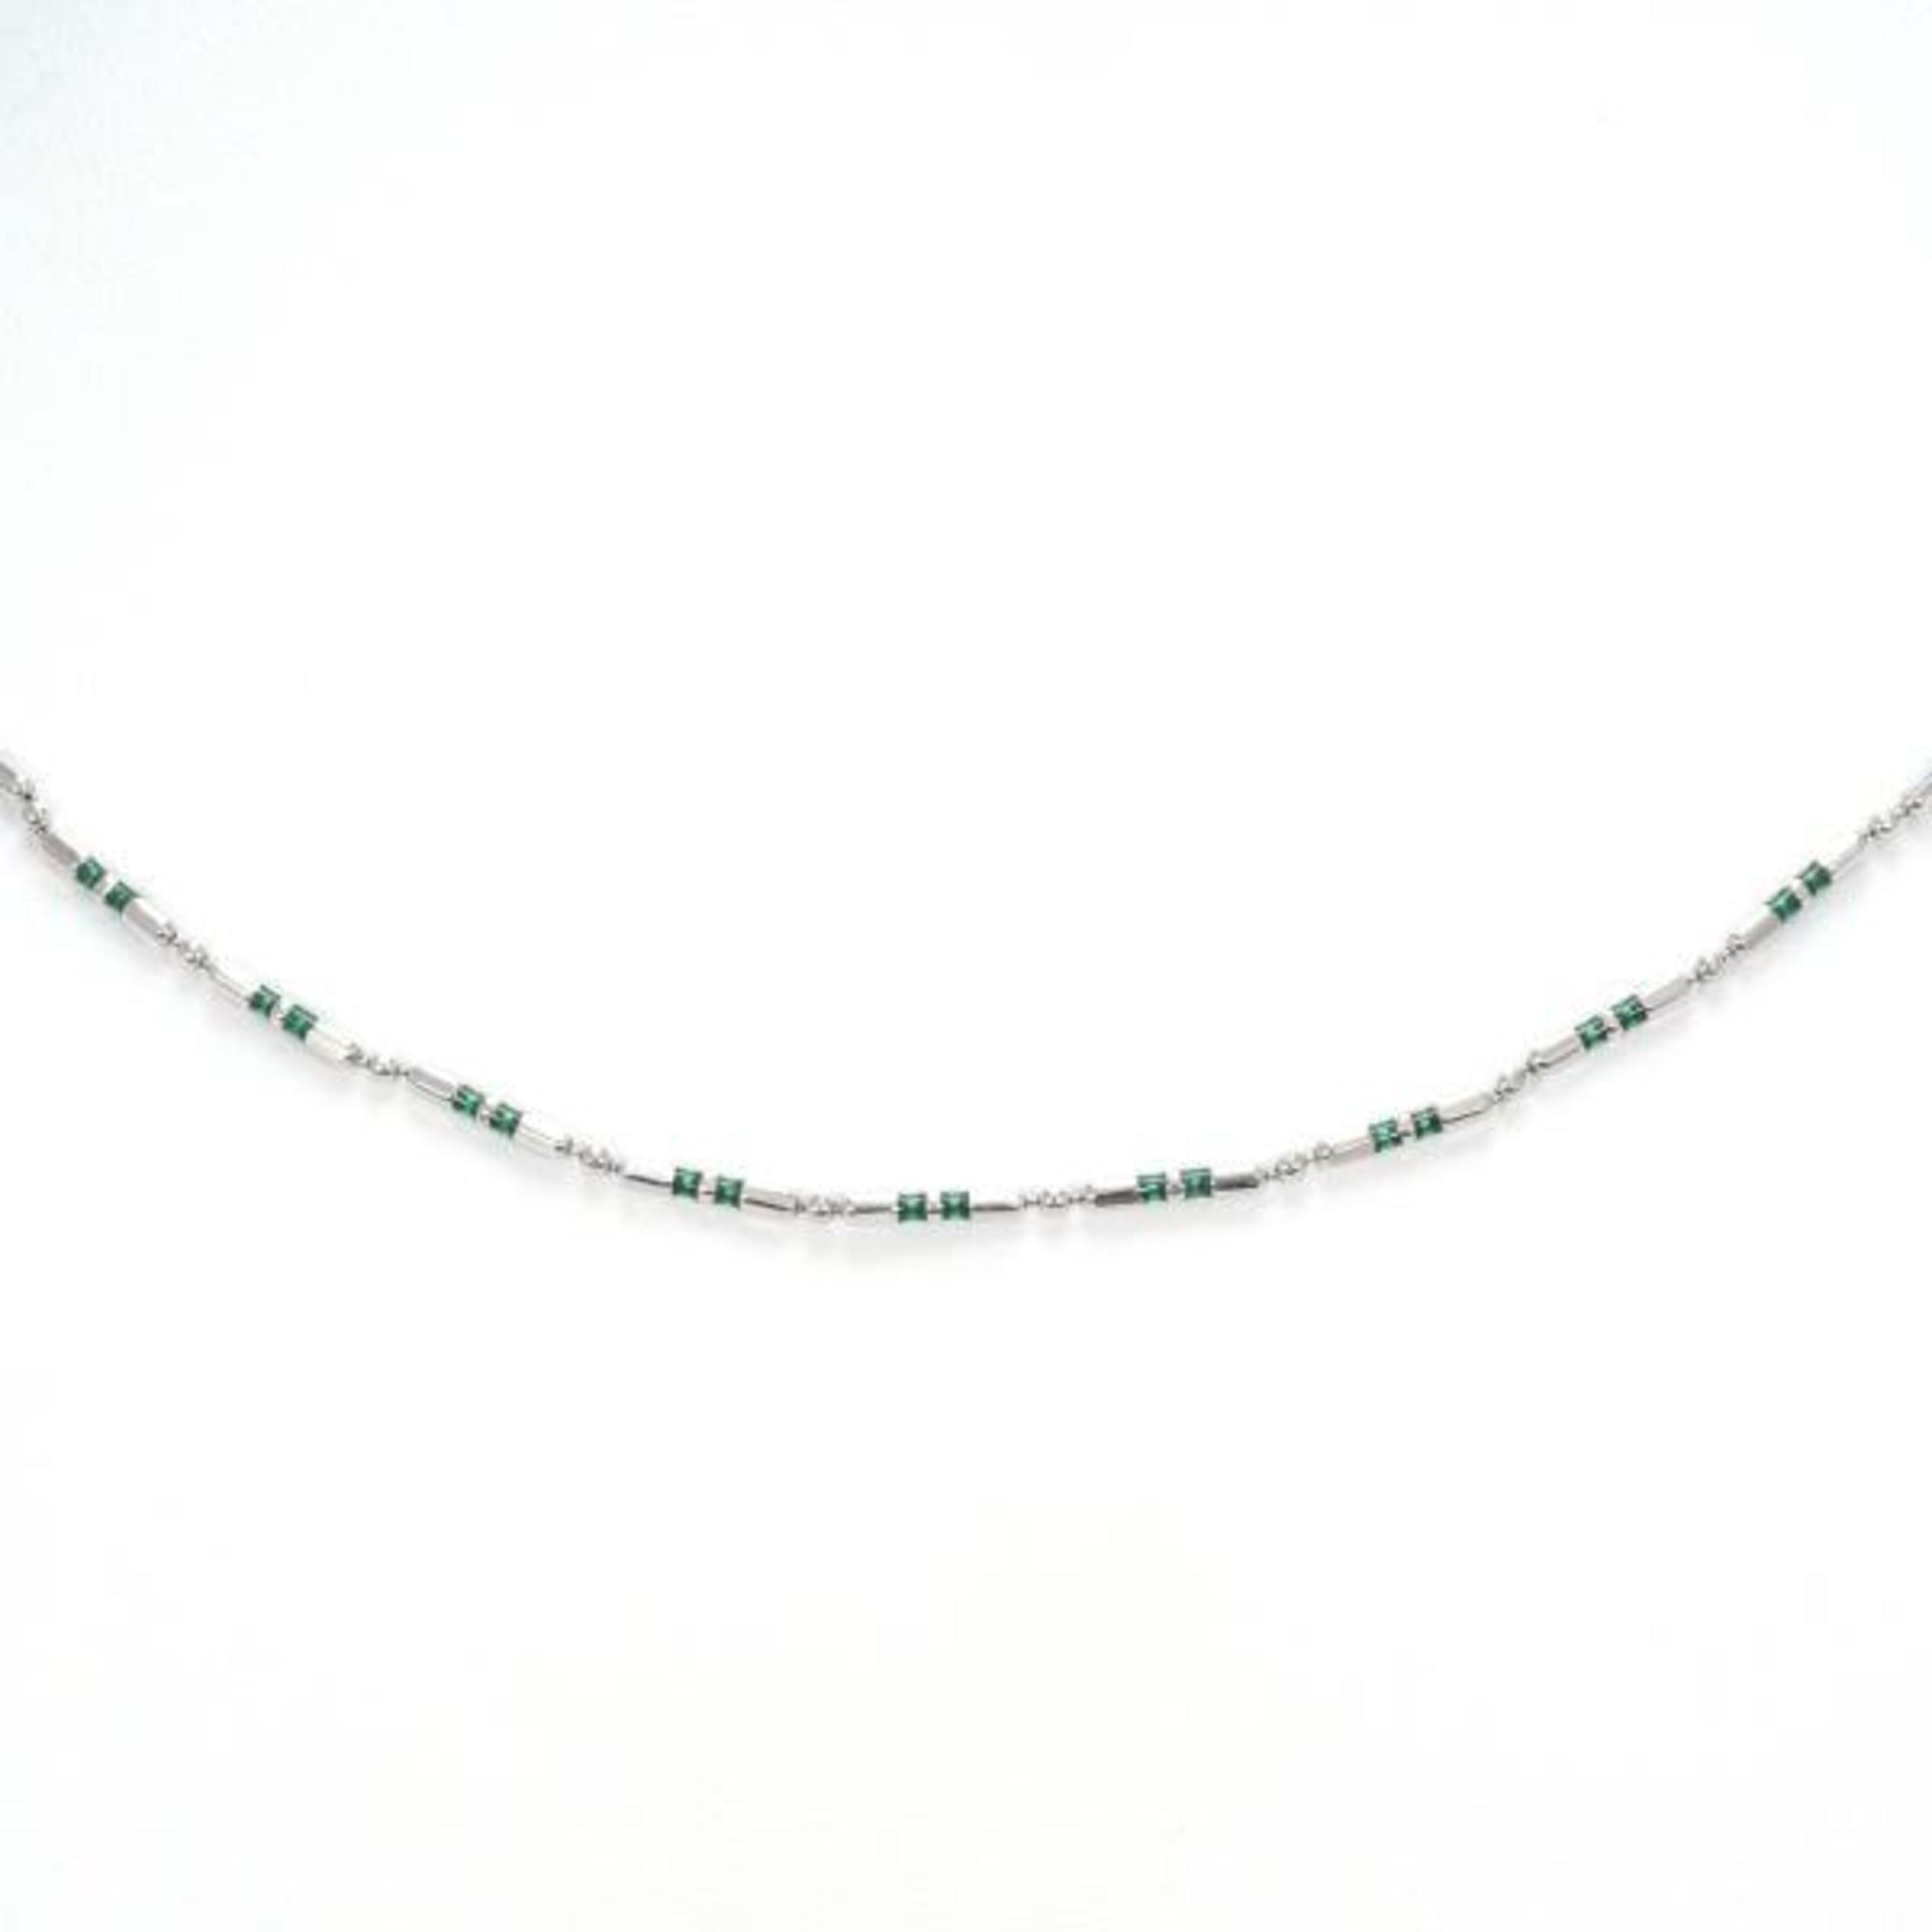 Seiko Jewelry PT850 Resin Necklace Total Weight Approx. 4.9g 40cm